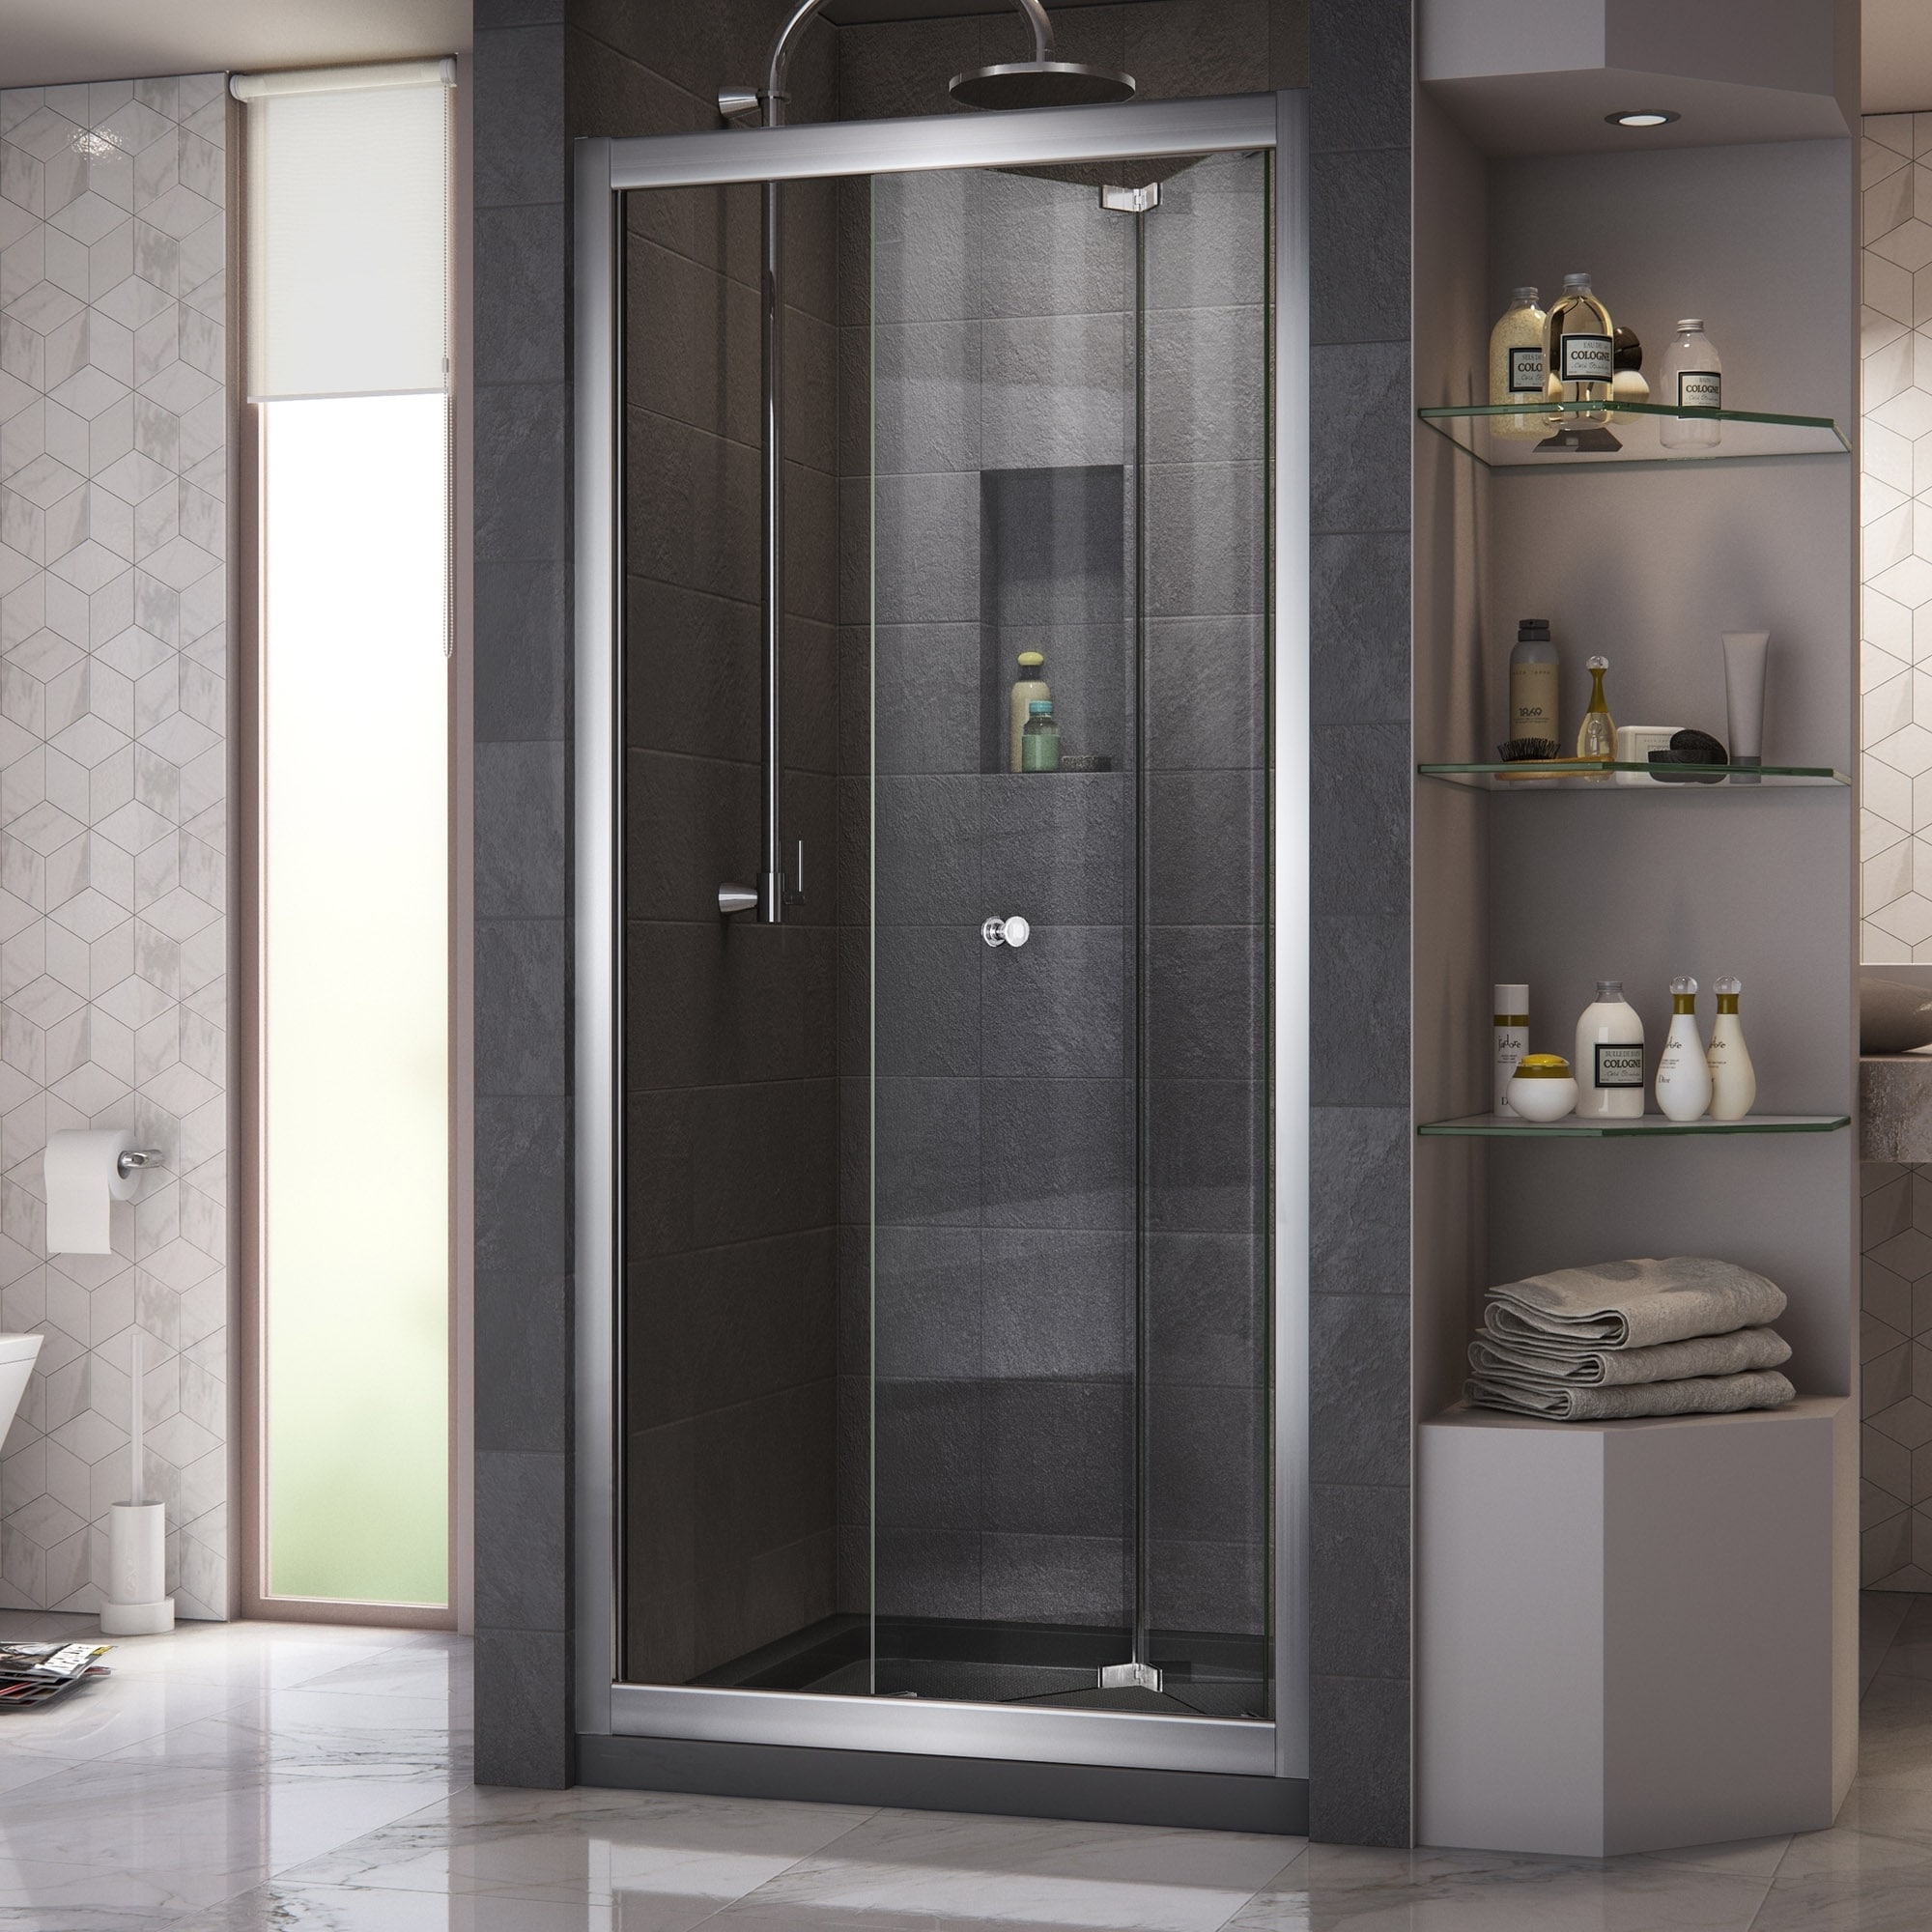 Dreamline Butterfly 34 35.5x72 inch Frameless Bi fold Shower Door (Tempered Glass, AluminumOptional SlimLine shower base and backwalls availableIntended use IndoorTempered glass ANSI certifiedAssembly requiredProduct WarrantyLimited 5 (five) year manufa